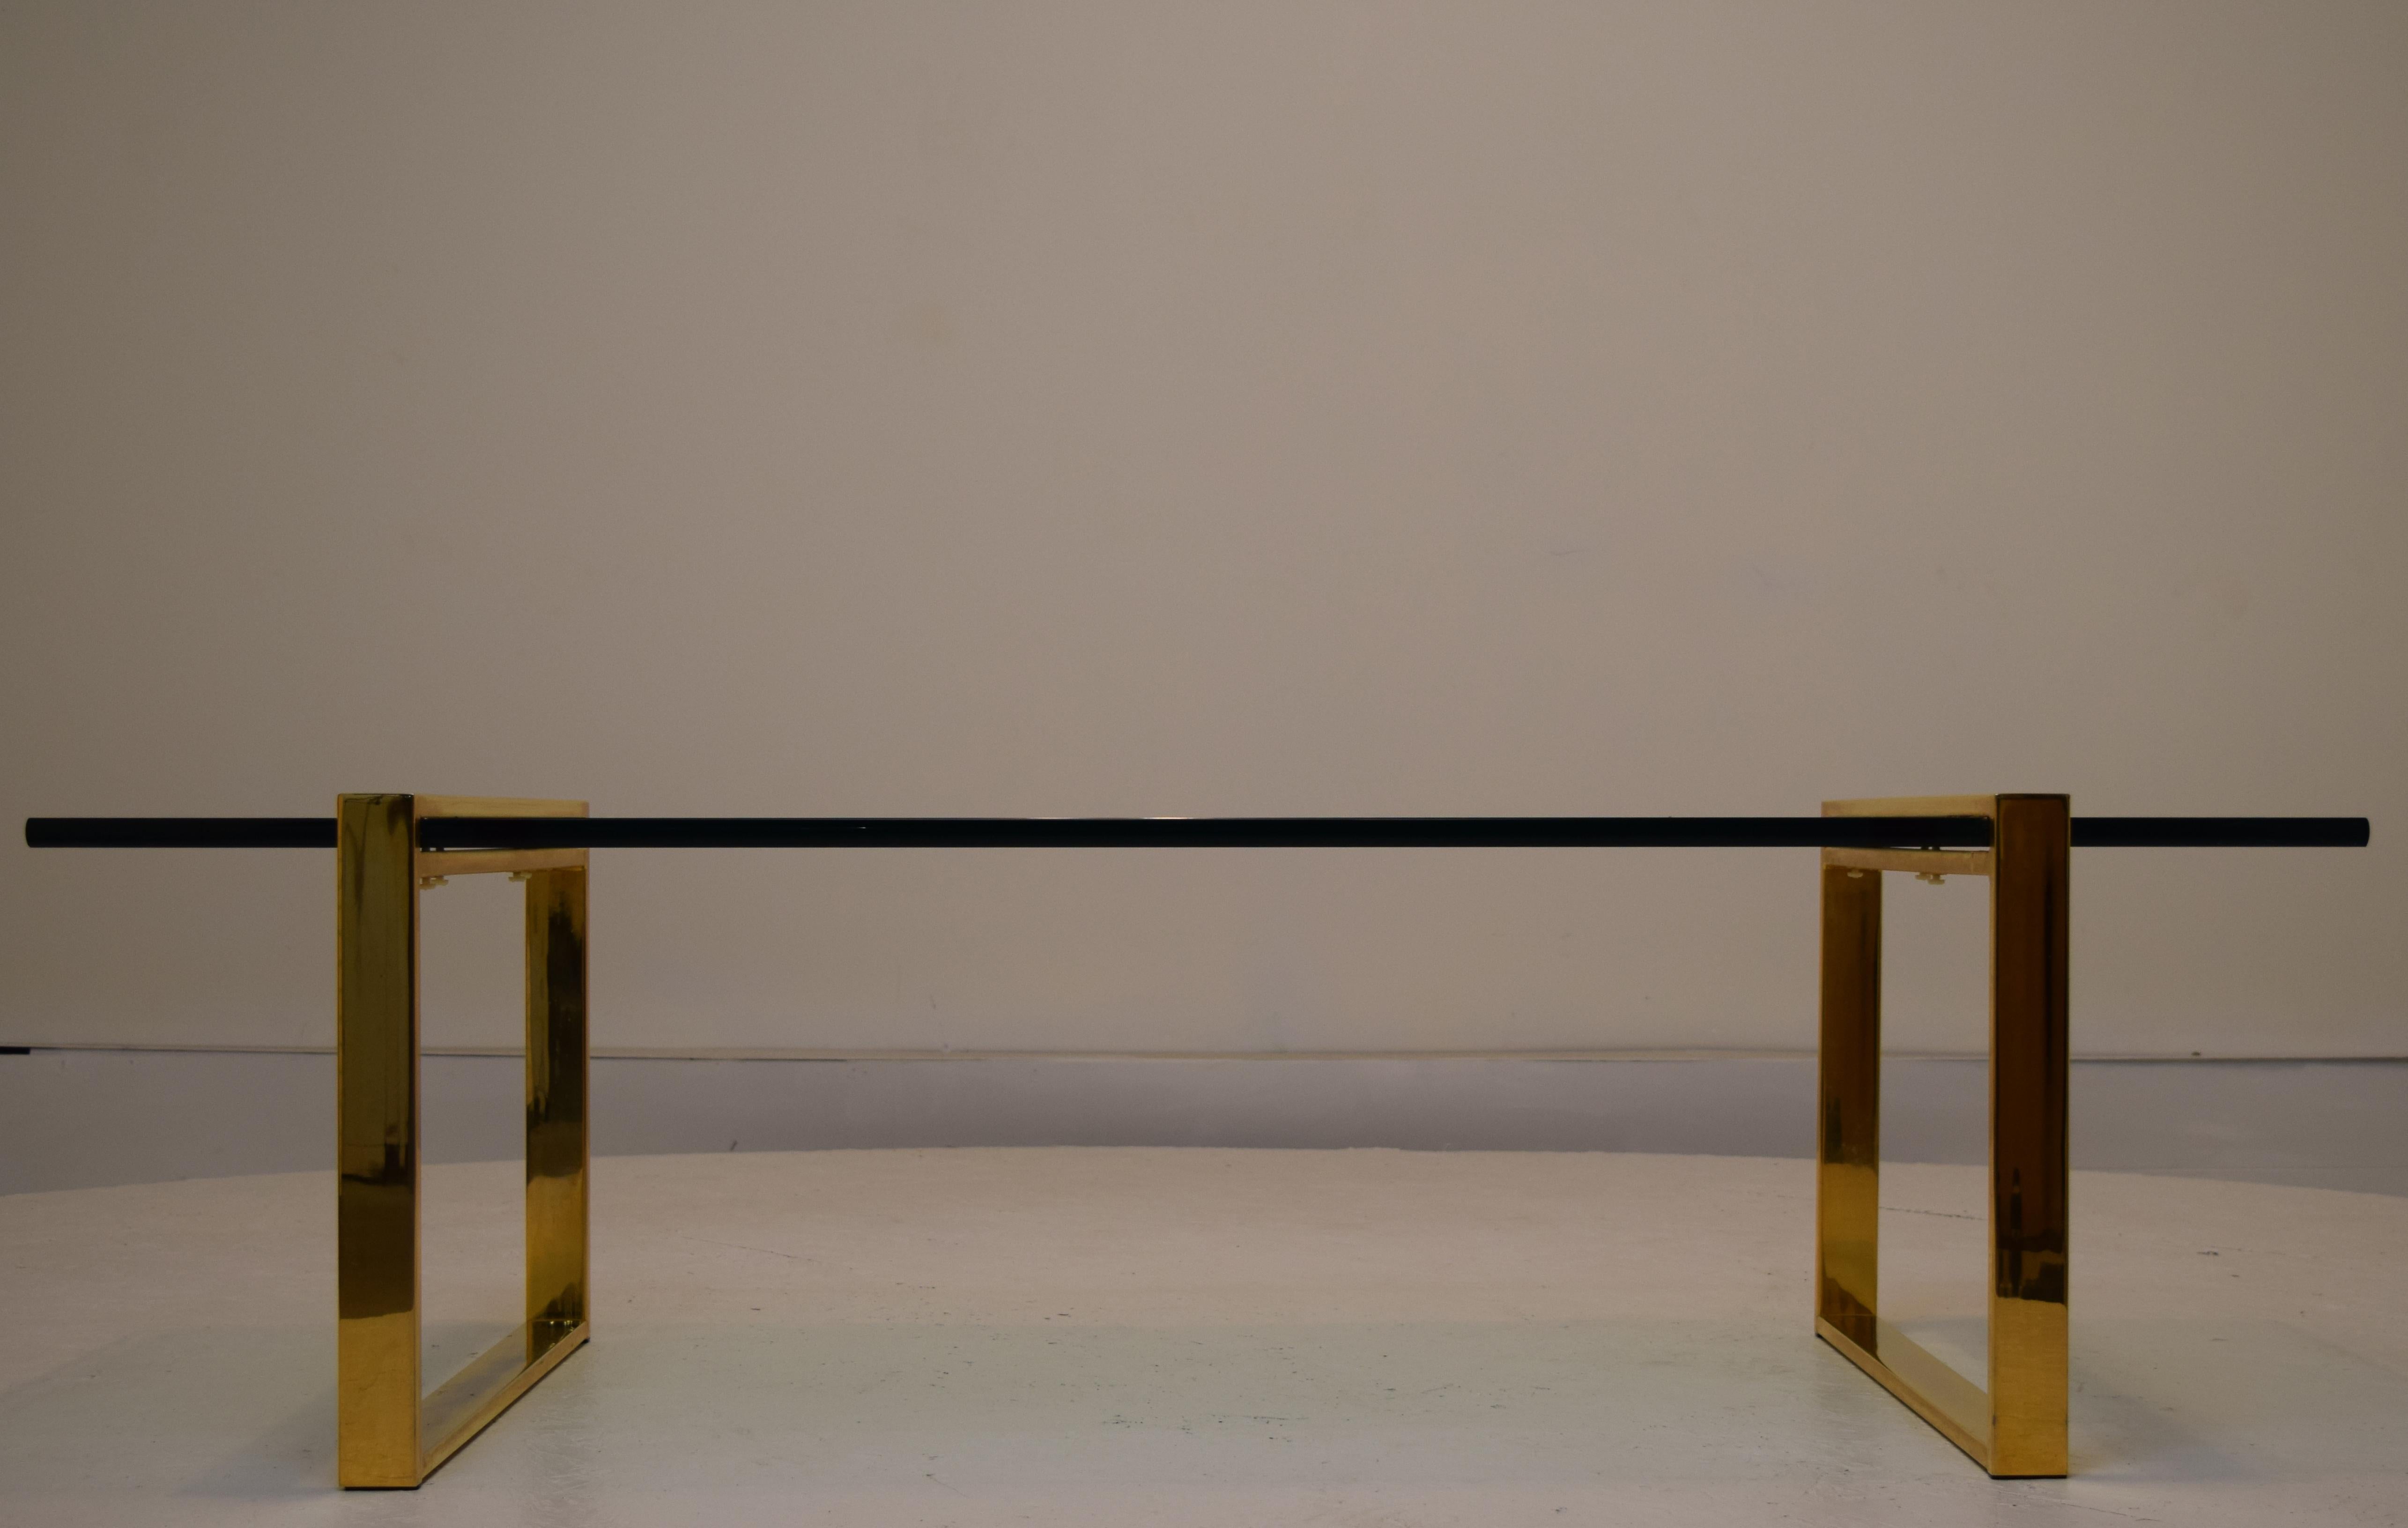 Produced by Pace in the 1970s, these coffee or reception area tables were provided in various finishes, this one is gold-plated. All original with original .75